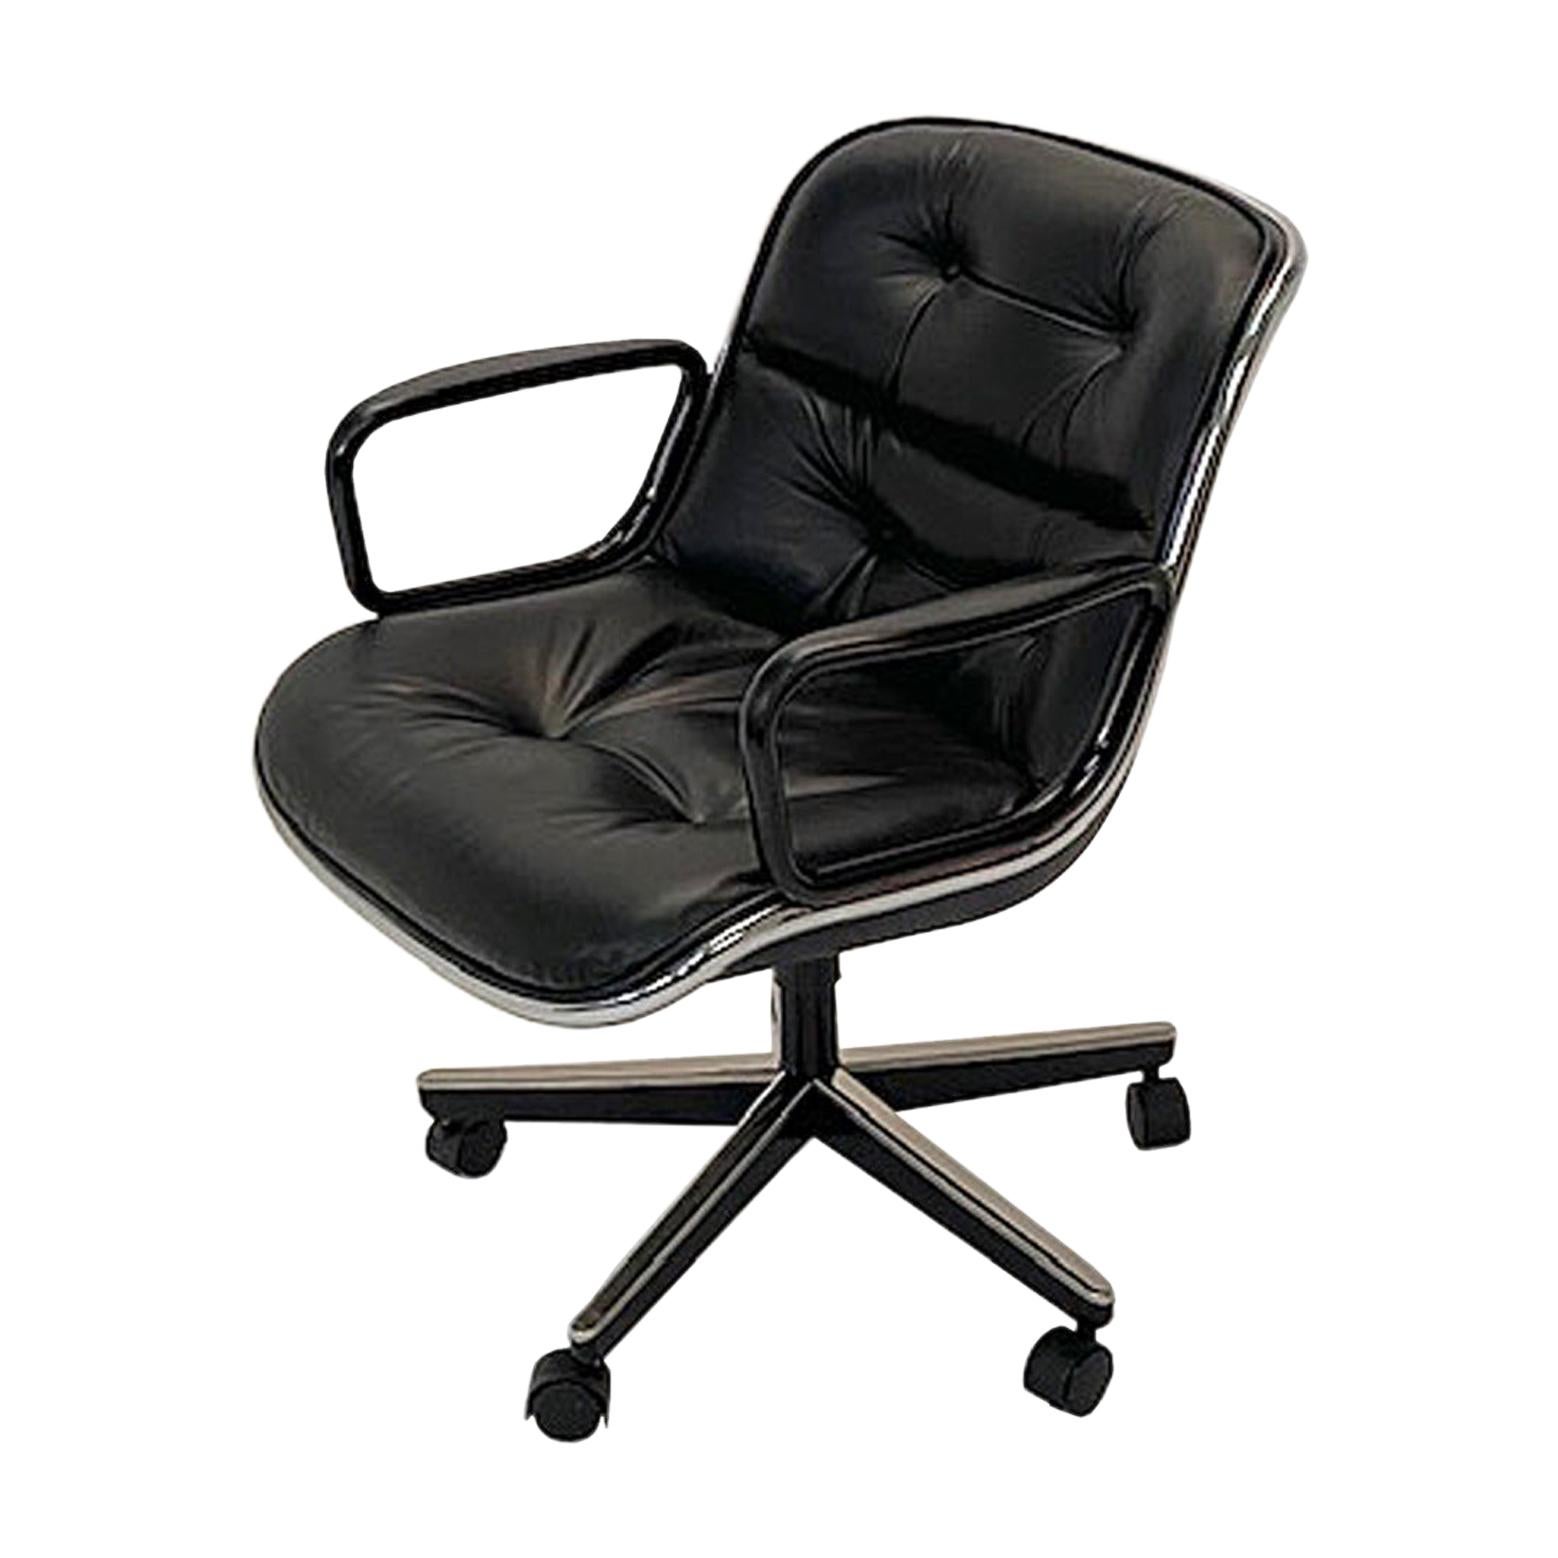 Charle Pollock Famous Five Star Office Chair for Knoll